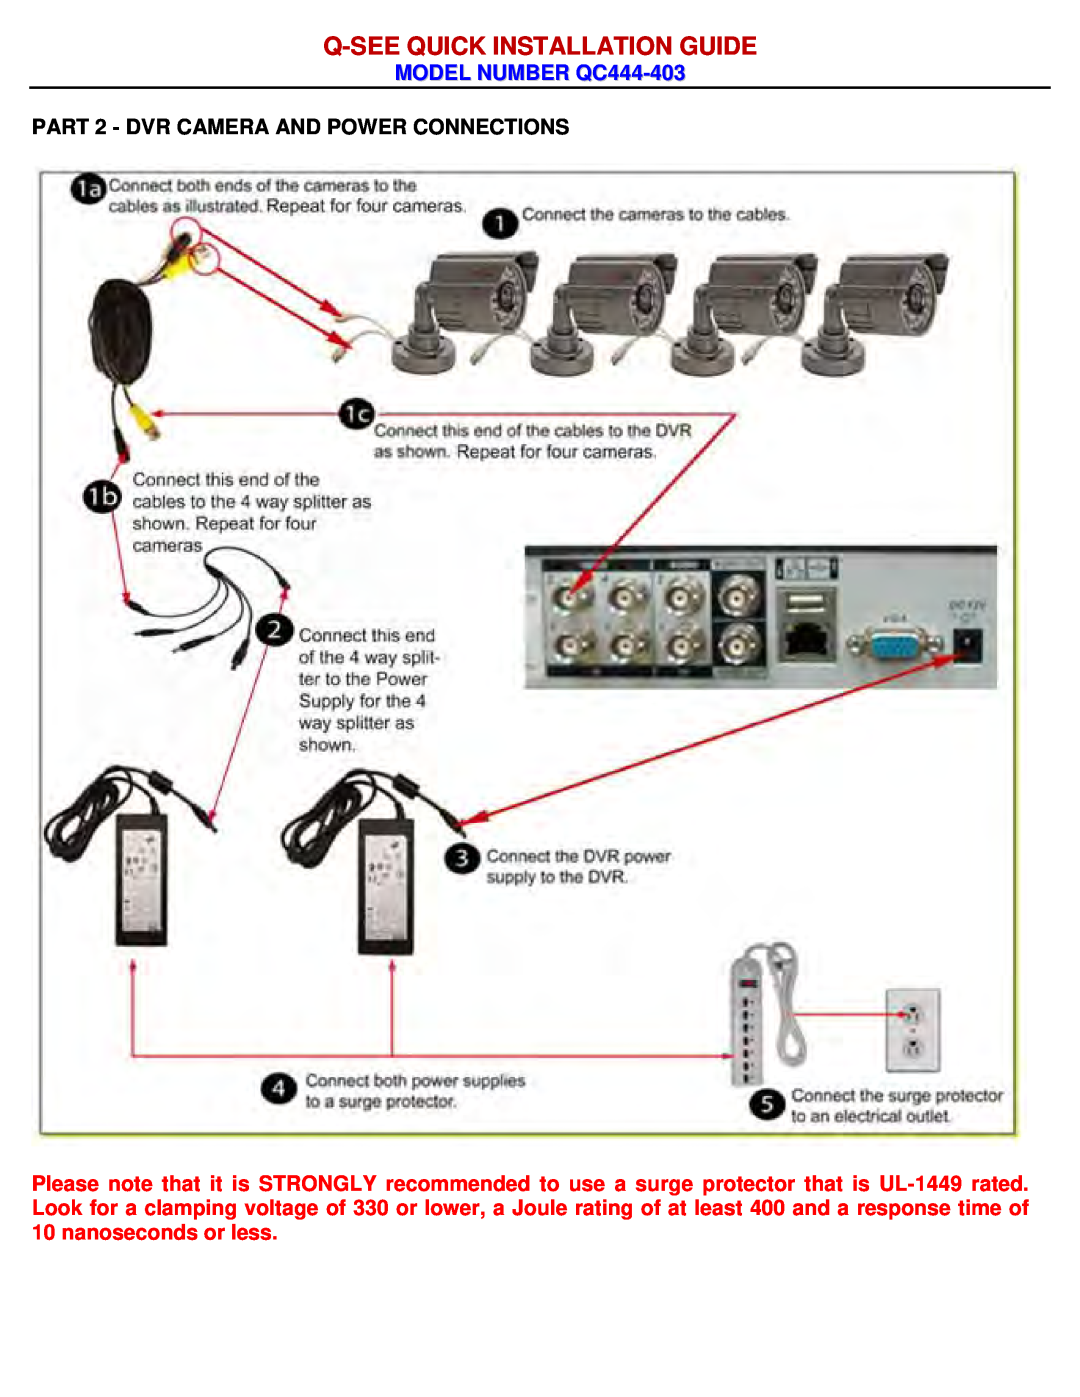 Q-See manual PART 2 - DVR CAMERA AND POWER CONNECTIONS, Q-See Quick Installation Guide, MODEL NUMBER QC444-403 